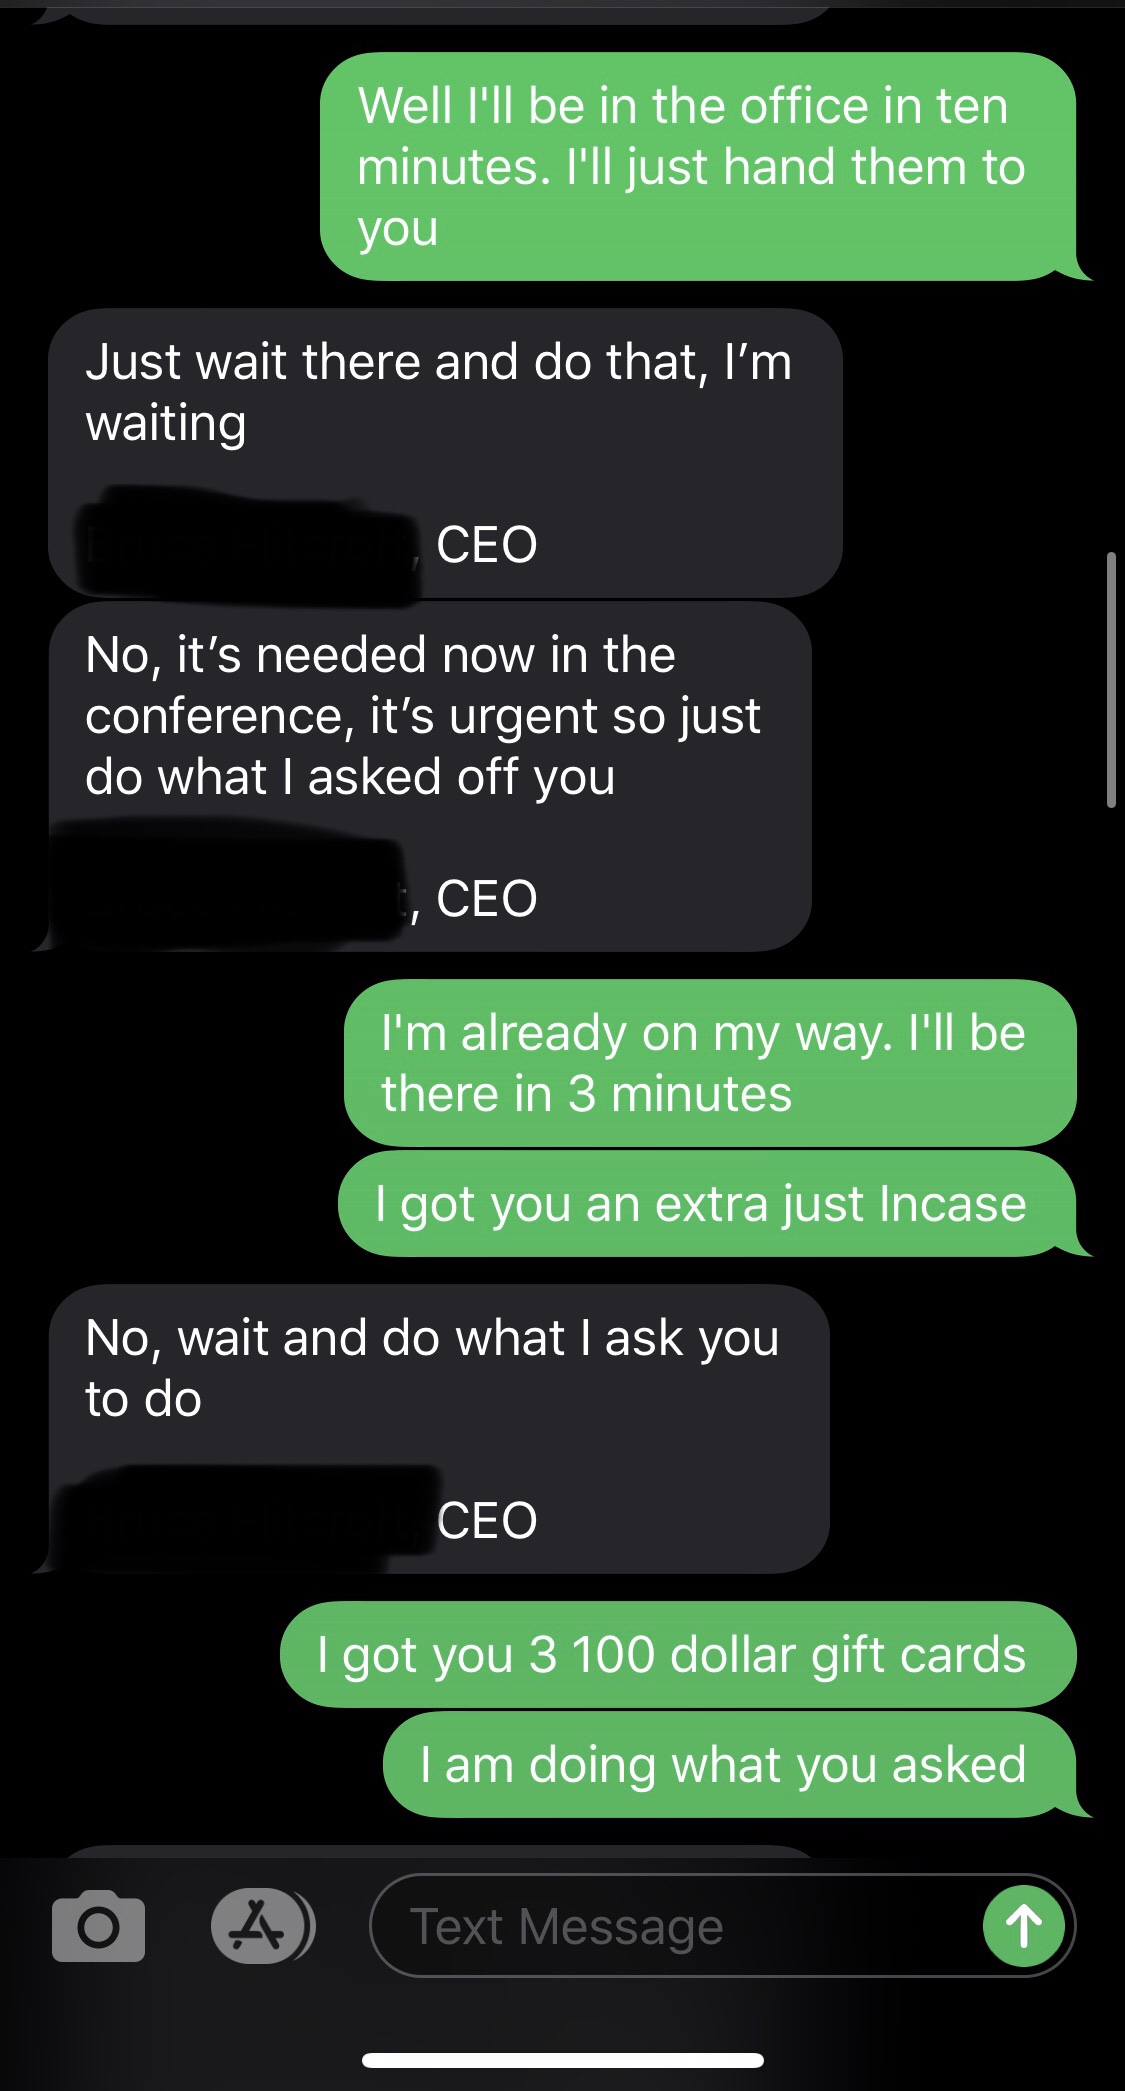 screenshot - Well I'll be in the office in ten minutes. I'll just hand them to you Just wait there and do that, I'm waiting Ceo No, it's needed now in the conference, it's urgent so just do what I asked off you Ceo I'm already on my way. I'll be there in 